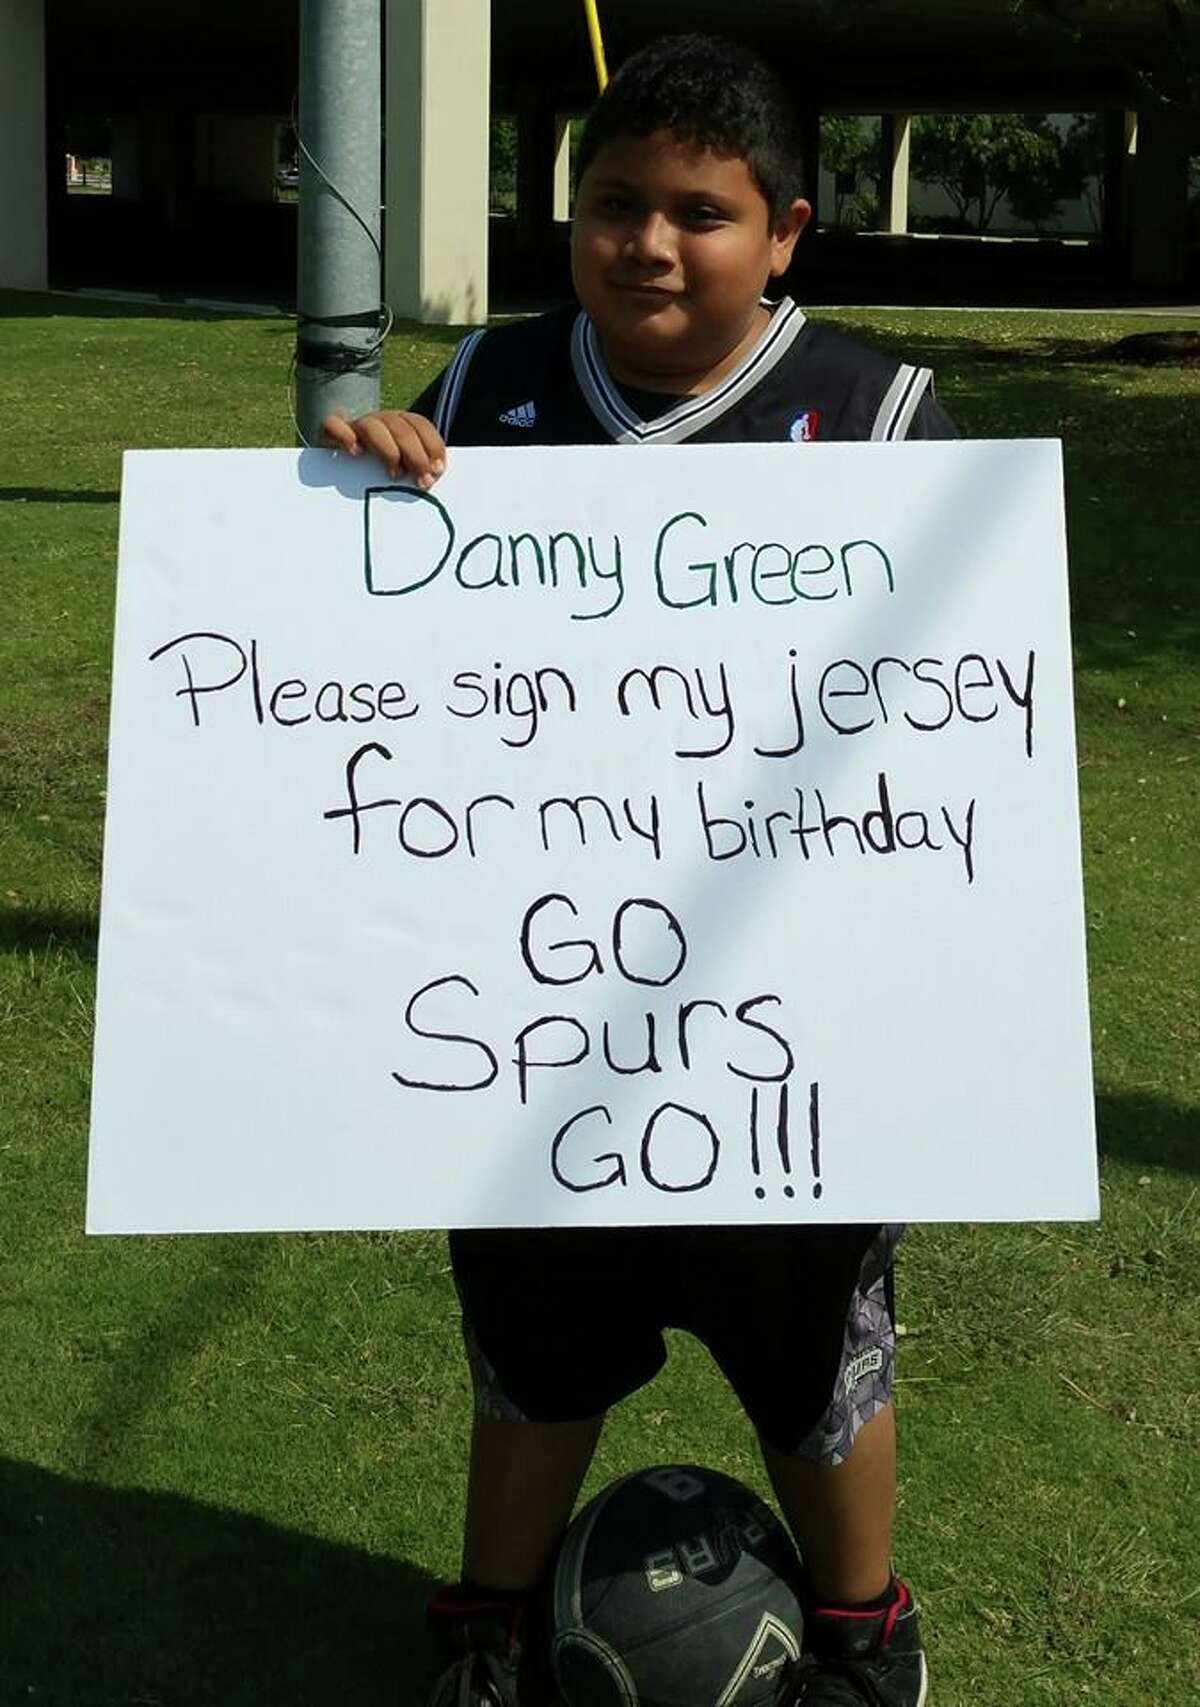 Josh Xon, 13, asked his "idol, Danny Green, to sign his jersey using this sign on April 30, 2016. 